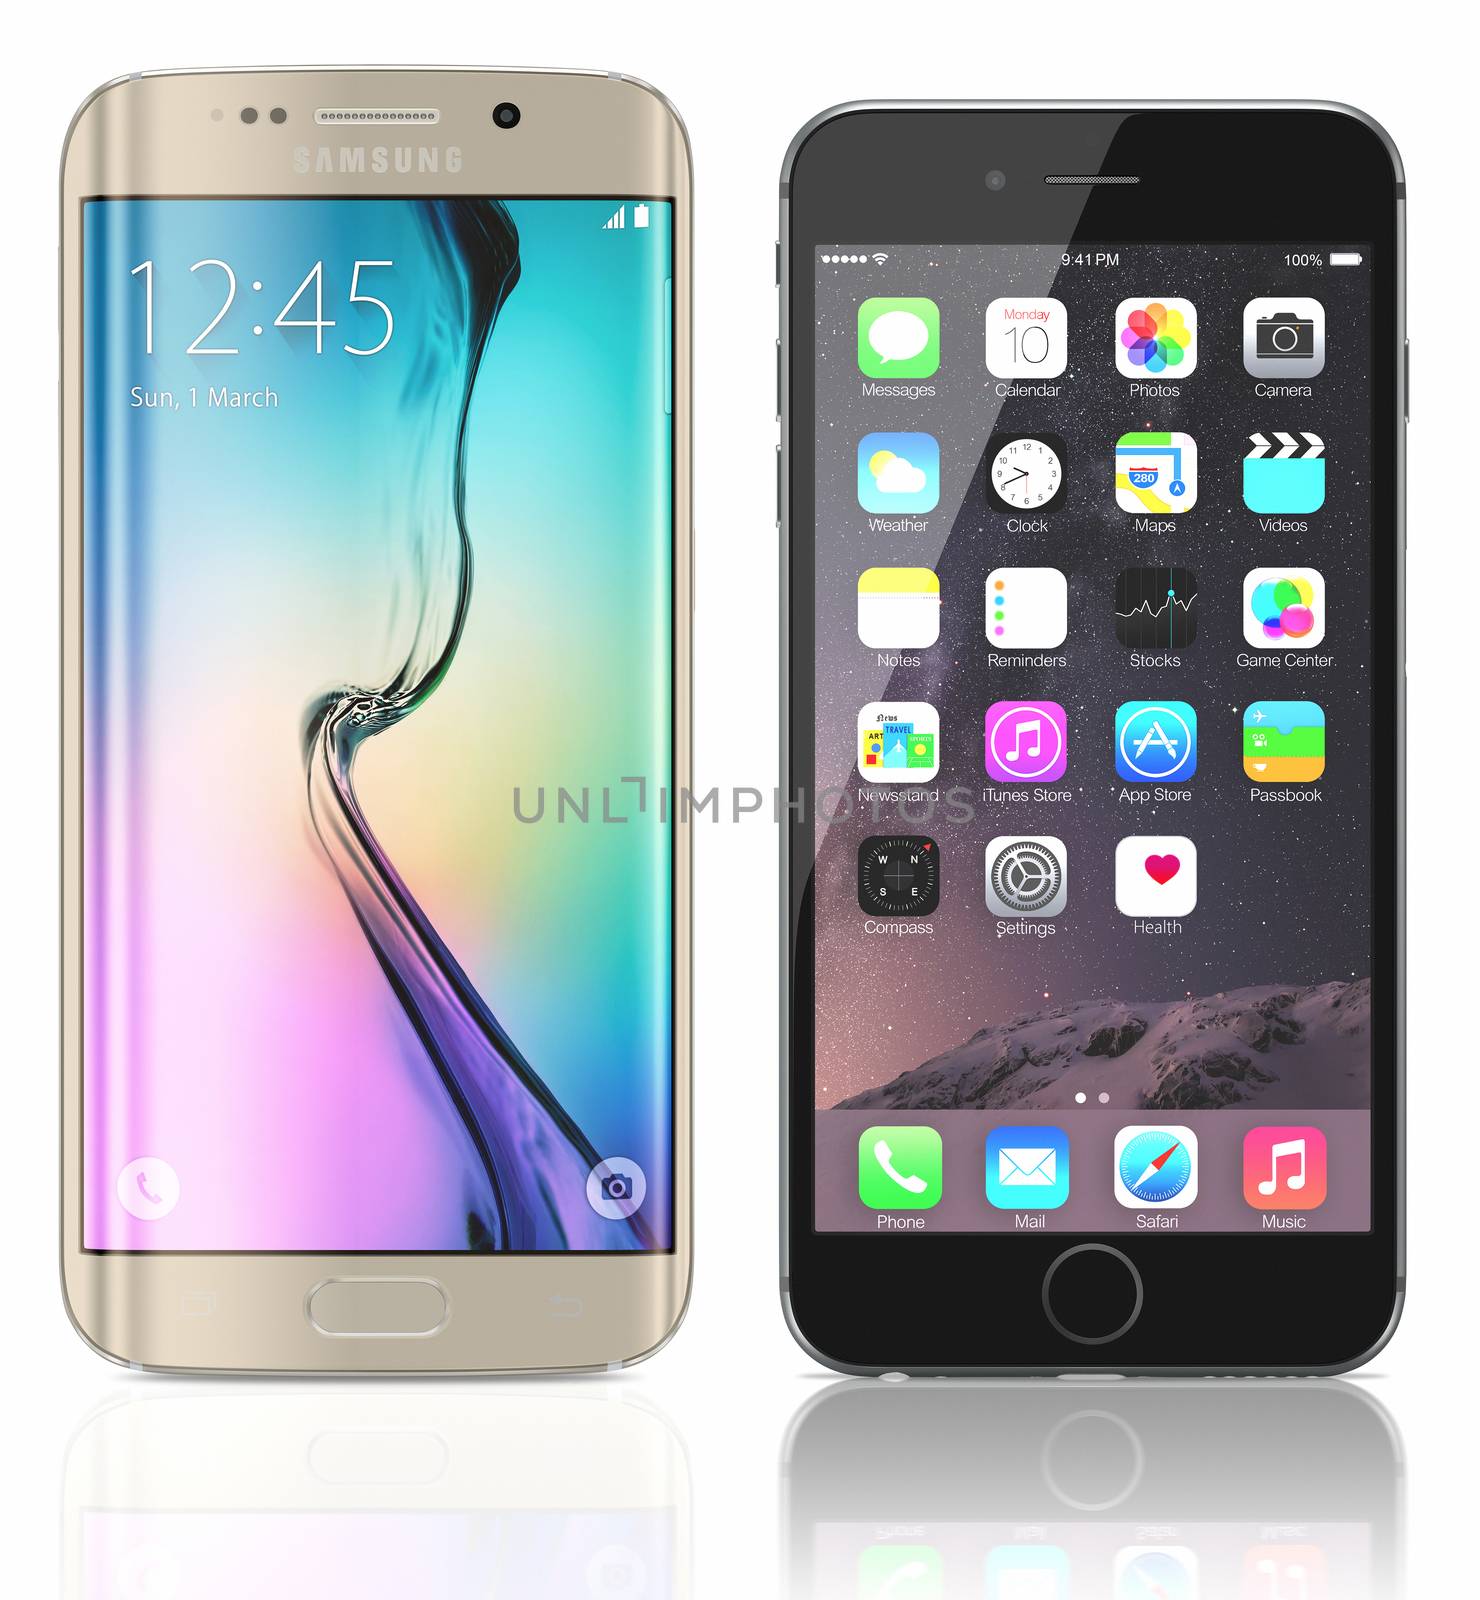 Galati, Romania - May 15, 2015: Gold Platinum Samsung Galaxy S6 Edge and Space Gray Apple iPhone 6 on white background. The Samsung Galaxy S6 was launched at a press event in Barcelona on March 1 2015. Apple released the iPhone 6 and iPhone 6 Plus on September 9, 2014.